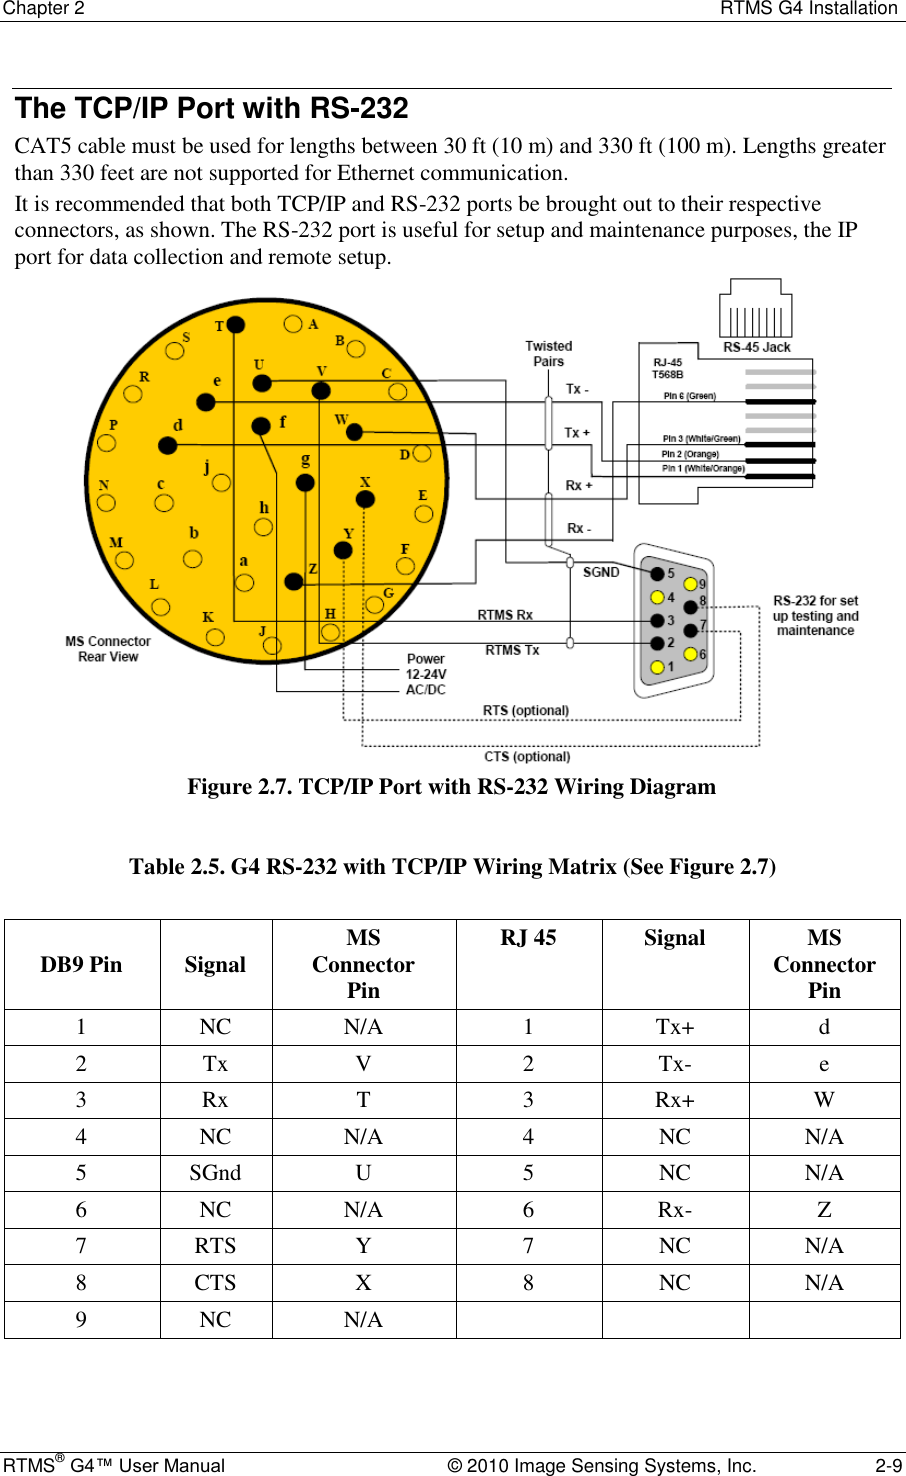 Chapter 2  RTMS G4 Installation RTMS® G4™ User Manual  © 2010 Image Sensing Systems, Inc.  2-9 The TCP/IP Port with RS-232 CAT5 cable must be used for lengths between 30 ft (10 m) and 330 ft (100 m). Lengths greater than 330 feet are not supported for Ethernet communication. It is recommended that both TCP/IP and RS-232 ports be brought out to their respective connectors, as shown. The RS-232 port is useful for setup and maintenance purposes, the IP port for data collection and remote setup.  Figure 2.7. TCP/IP Port with RS-232 Wiring Diagram  Table 2.5. G4 RS-232 with TCP/IP Wiring Matrix (See Figure 2.7)  DB9 Pin Signal MS Connector Pin RJ 45 Signal MS Connector Pin 1 NC N/A 1 Tx+ d 2 Tx V 2 Tx- e 3 Rx T 3 Rx+ W 4 NC N/A 4 NC N/A 5 SGnd U 5 NC N/A 6 NC N/A 6 Rx- Z 7 RTS Y 7 NC N/A 8 CTS X 8 NC N/A 9 NC N/A     